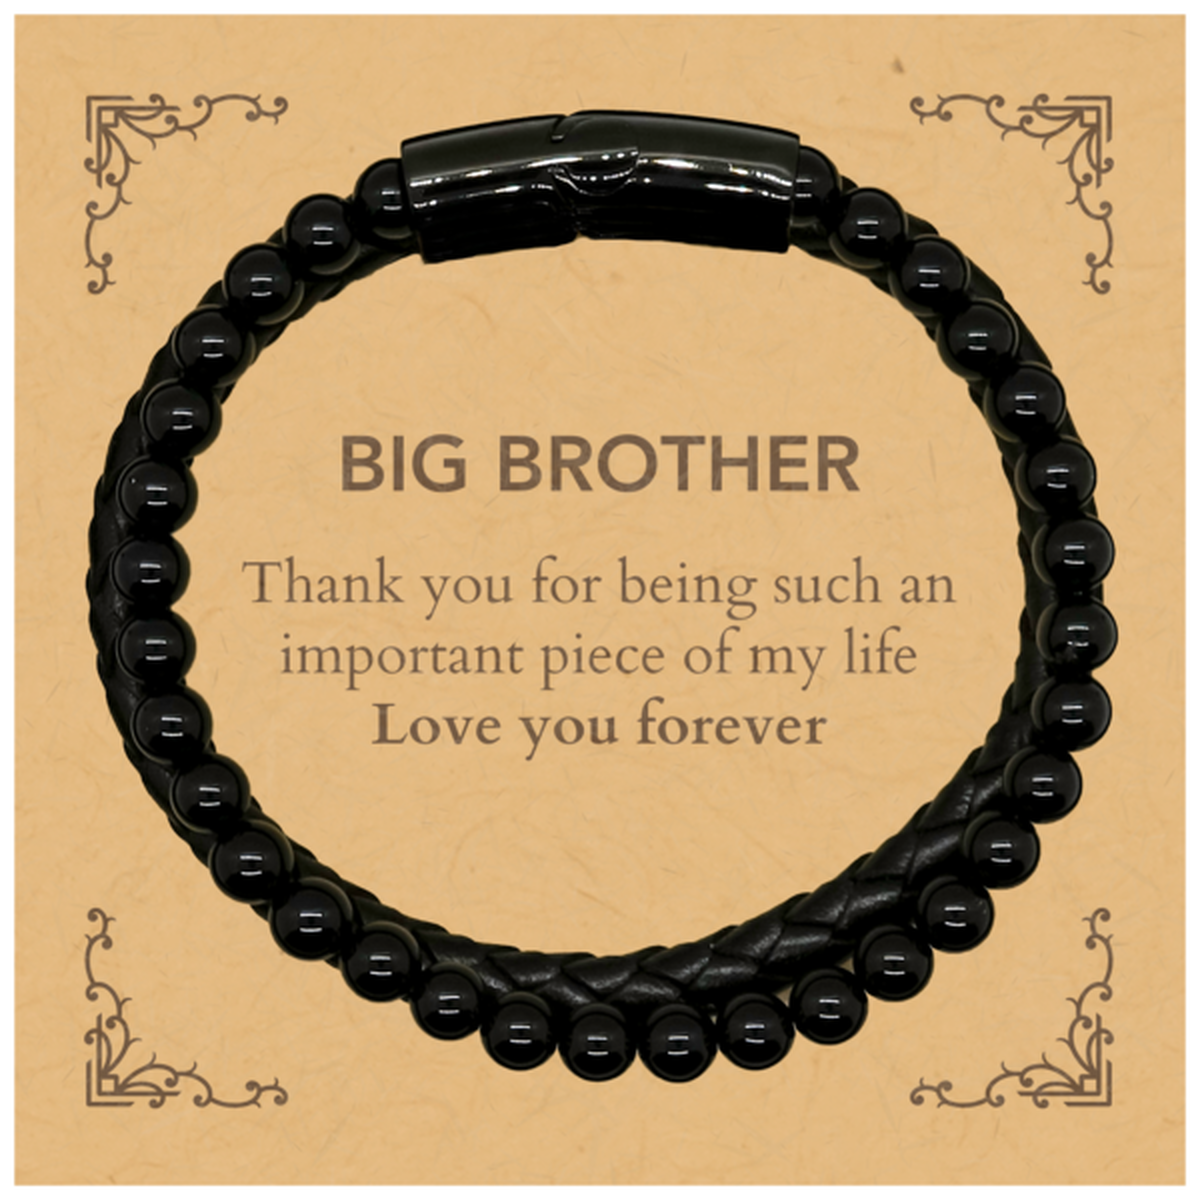 Appropriate Big Brother Stone Leather Bracelets Epic Birthday Gifts for Big Brother Thank you for being such an important piece of my life Big Brother Christmas Mothers Fathers Day